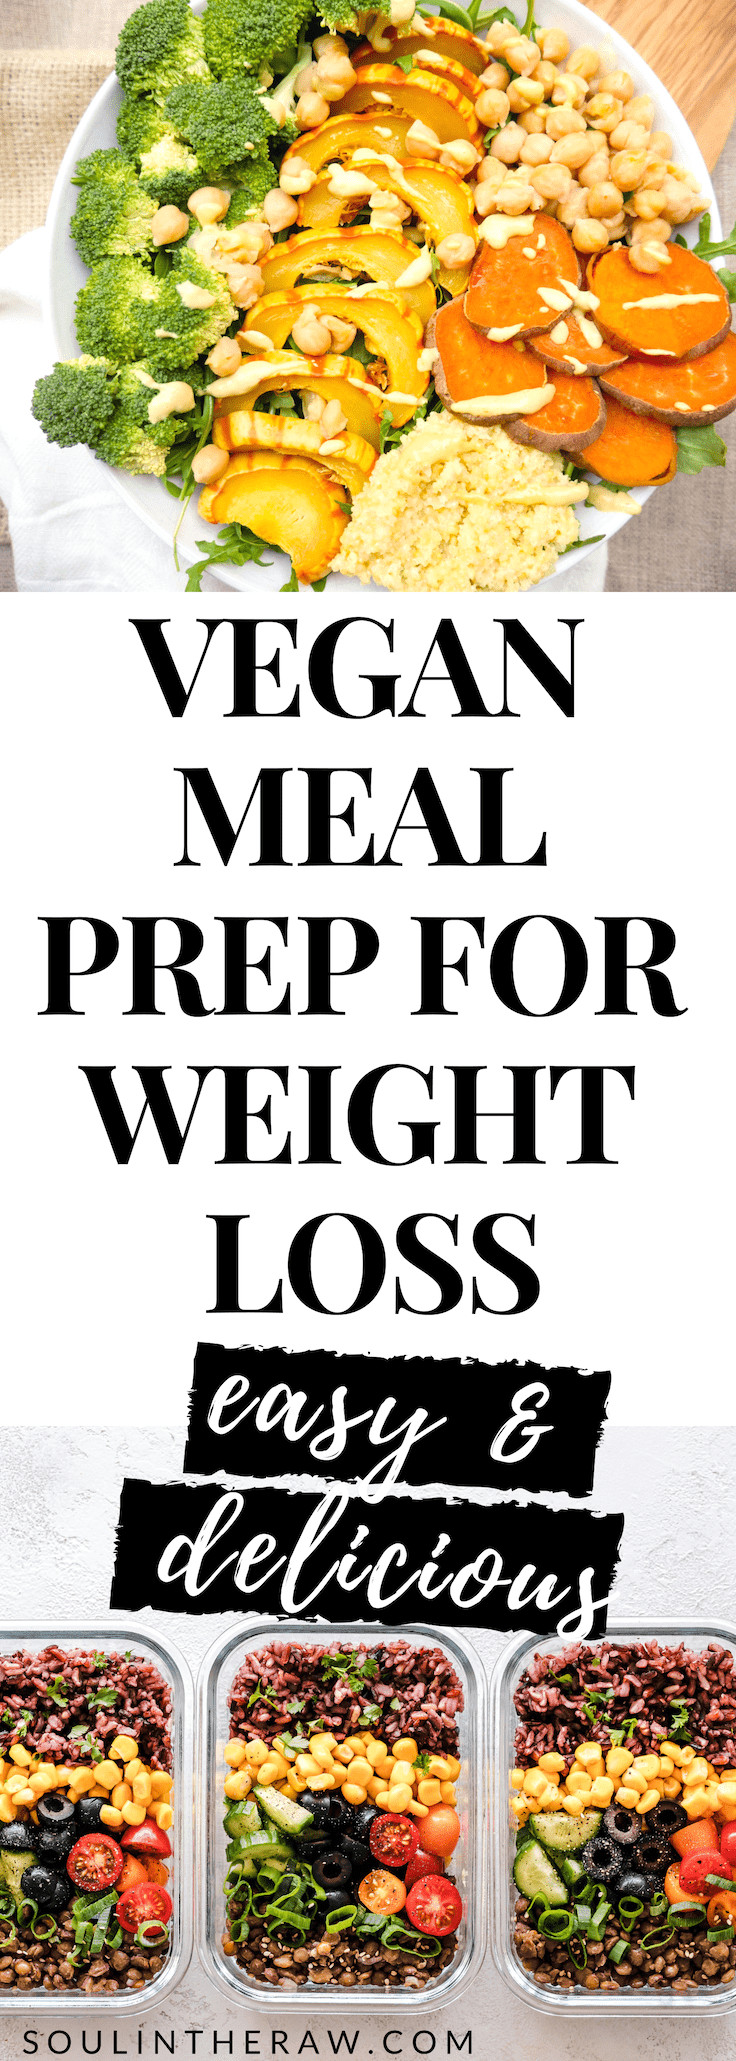 Plant Based Weight Loss Meal Plan
 Plant Based Diet Weight Loss The Vegan Meal Prep Plan